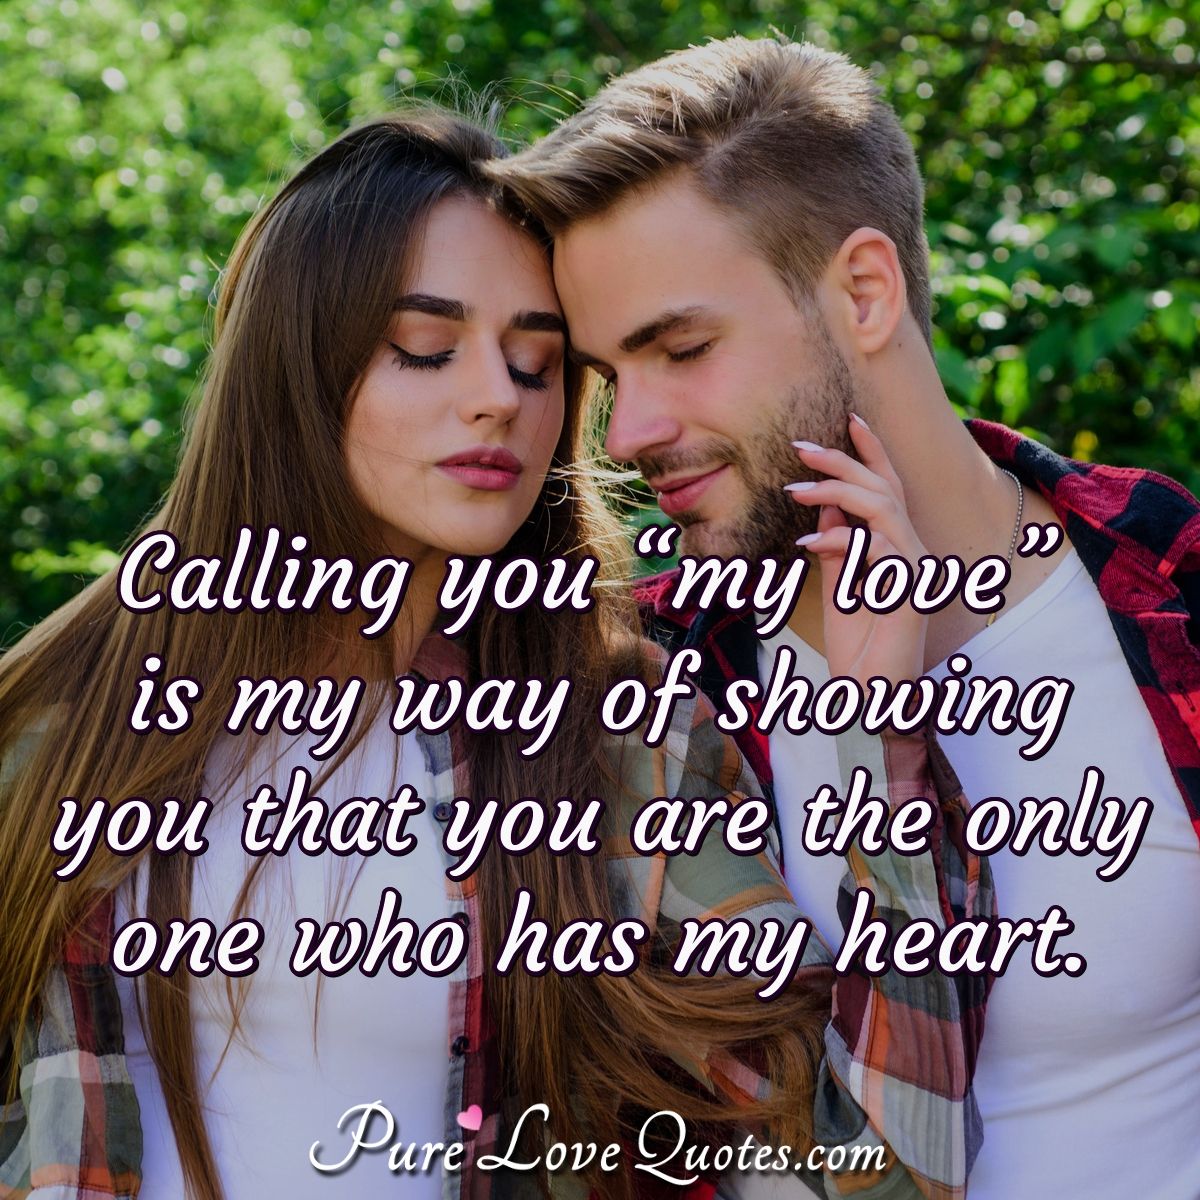 The Love I Have For You Is Calling